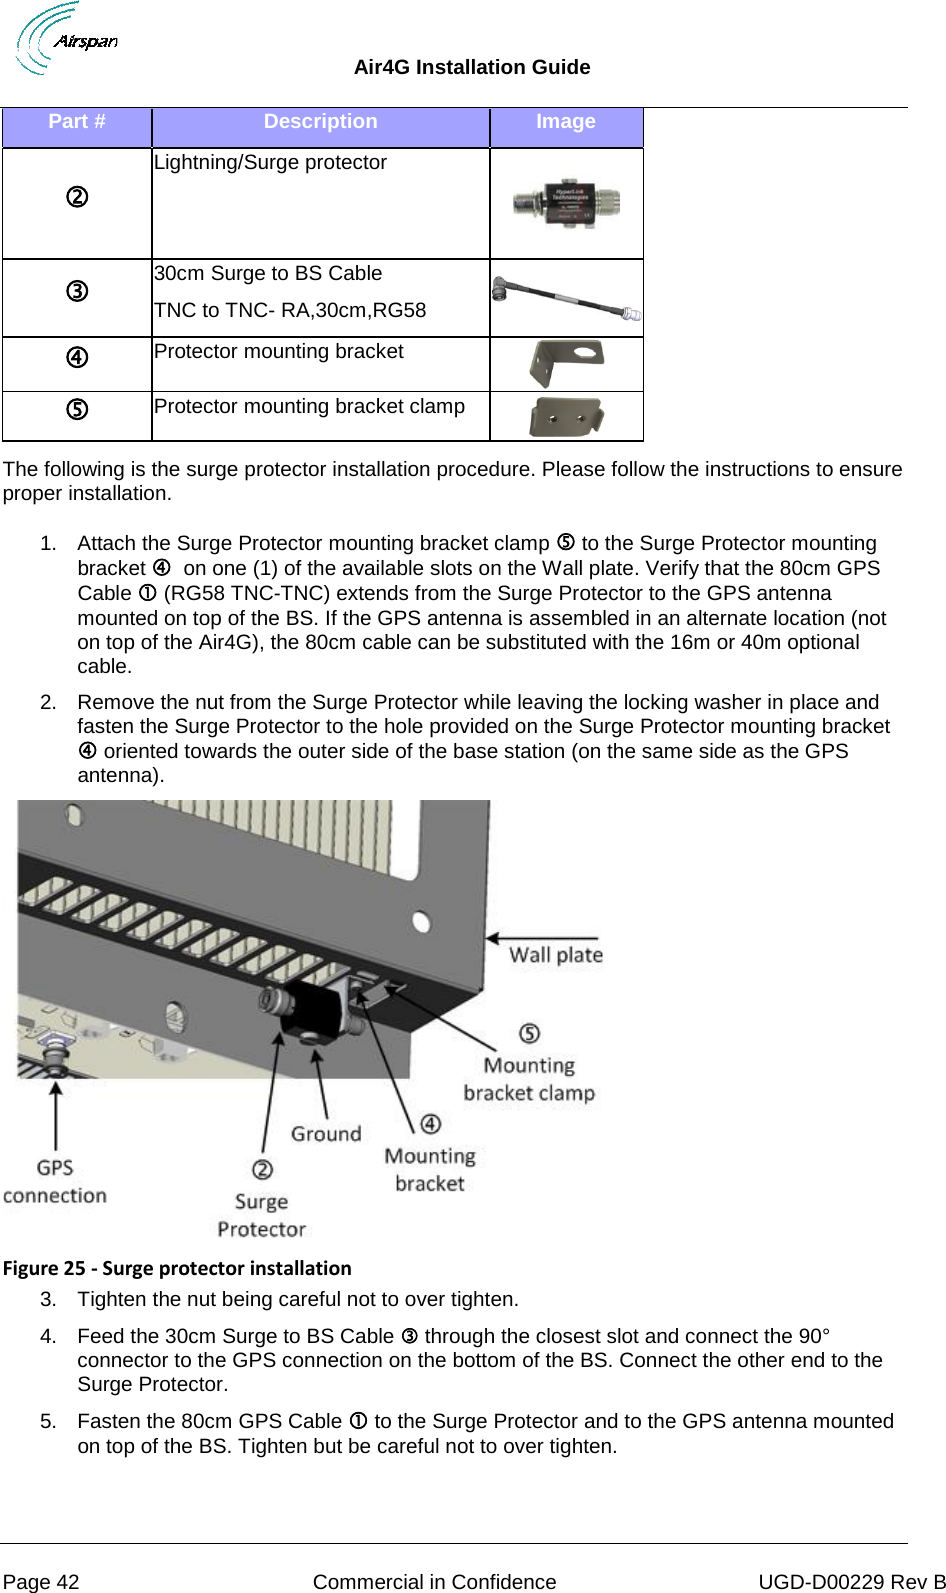  Air4G Installation Guide     Page 42 Commercial in Confidence UGD-D00229 Rev B Part # Description Image  Lightning/Surge protector   30cm Surge to BS Cable  TNC to TNC- RA,30cm,RG58   Protector mounting bracket   Protector mounting bracket clamp   The following is the surge protector installation procedure. Please follow the instructions to ensure proper installation.  1. Attach the Surge Protector mounting bracket clamp  to the Surge Protector mounting bracket   on one (1) of the available slots on the Wall plate. Verify that the 80cm GPS Cable  (RG58 TNC-TNC) extends from the Surge Protector to the GPS antenna mounted on top of the BS. If the GPS antenna is assembled in an alternate location (not on top of the Air4G), the 80cm cable can be substituted with the 16m or 40m optional cable. 2. Remove the nut from the Surge Protector while leaving the locking washer in place and fasten the Surge Protector to the hole provided on the Surge Protector mounting bracket  oriented towards the outer side of the base station (on the same side as the GPS antenna).  Figure 25 - Surge protector installation 3. Tighten the nut being careful not to over tighten. 4. Feed the 30cm Surge to BS Cable  through the closest slot and connect the 90° connector to the GPS connection on the bottom of the BS. Connect the other end to the Surge Protector.  5. Fasten the 80cm GPS Cable  to the Surge Protector and to the GPS antenna mounted on top of the BS. Tighten but be careful not to over tighten. 